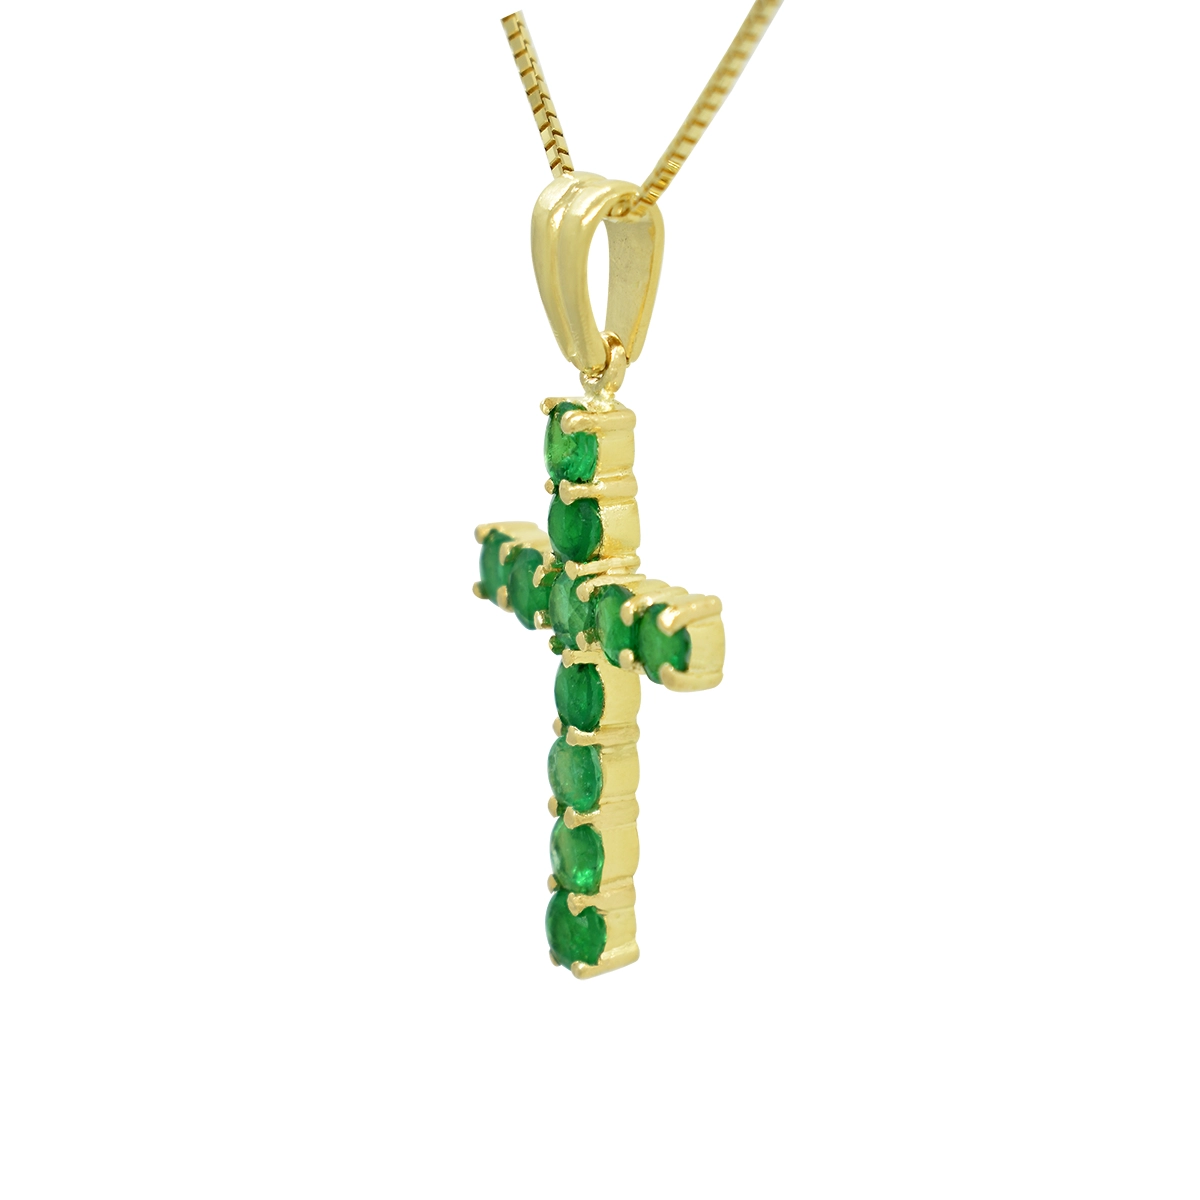 Emerald cross pendant necklace, side view showing durable prong setting for each gem in solid 18K yellow gold